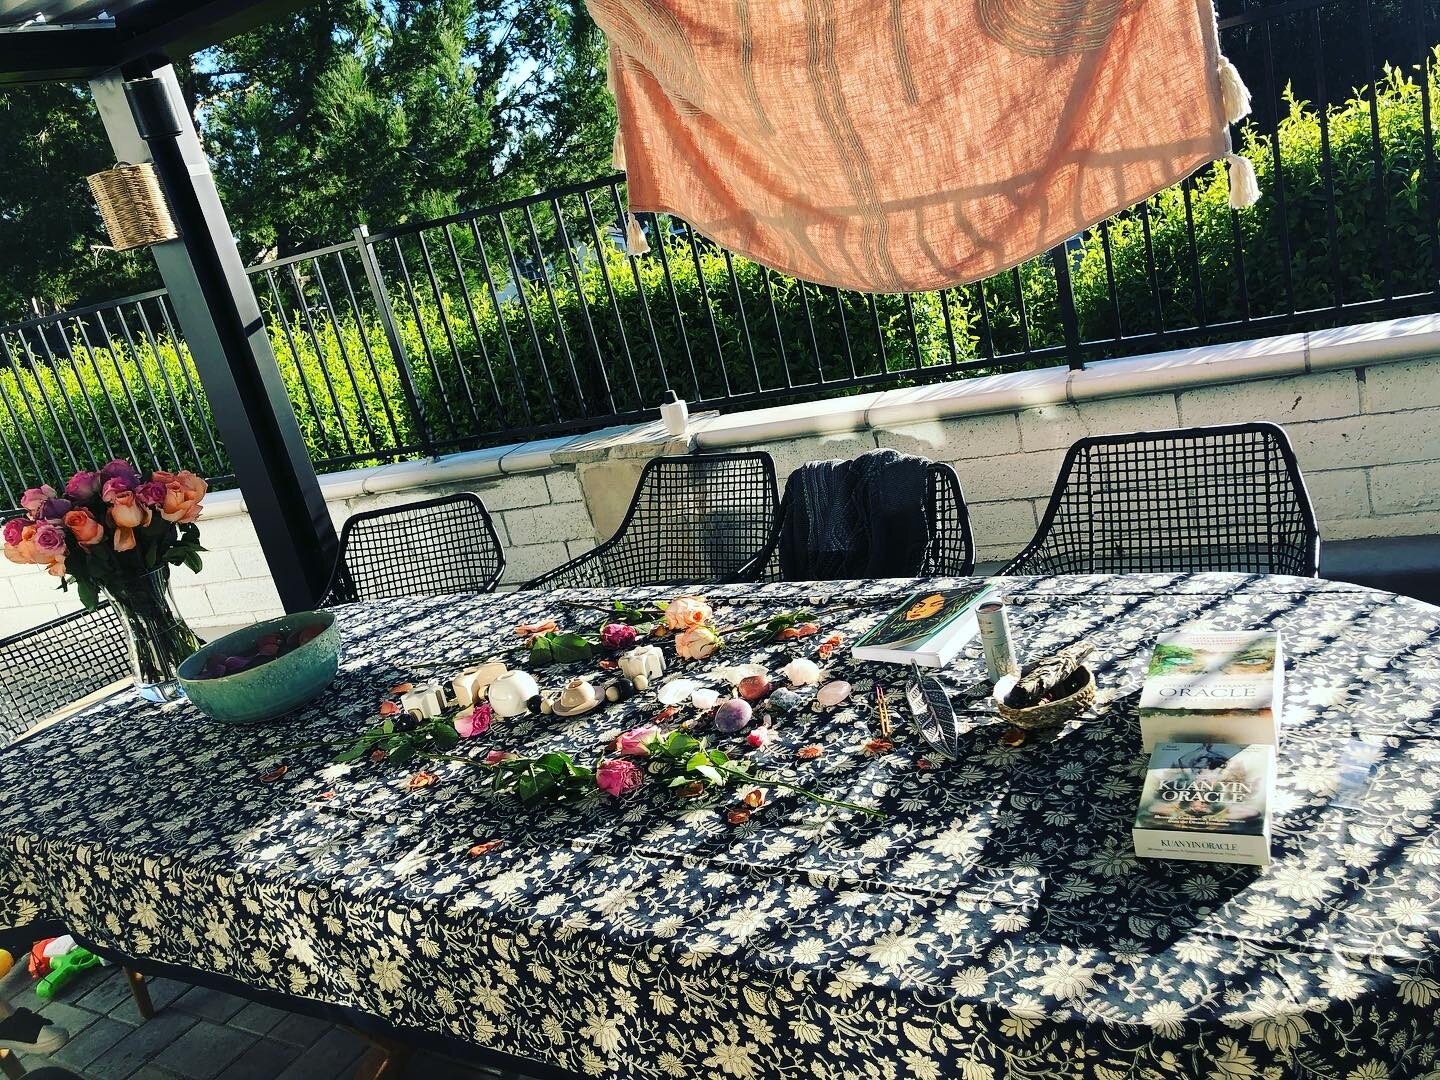 Spent the afternoon in community with the goddess and some amazing women. It is through coming together that we shine brightest. ✨🌟 Join me next Thursday for &ldquo;Tea with the Goddess&rdquo; at 3. We will sip, savor and embody the feminine. Messag